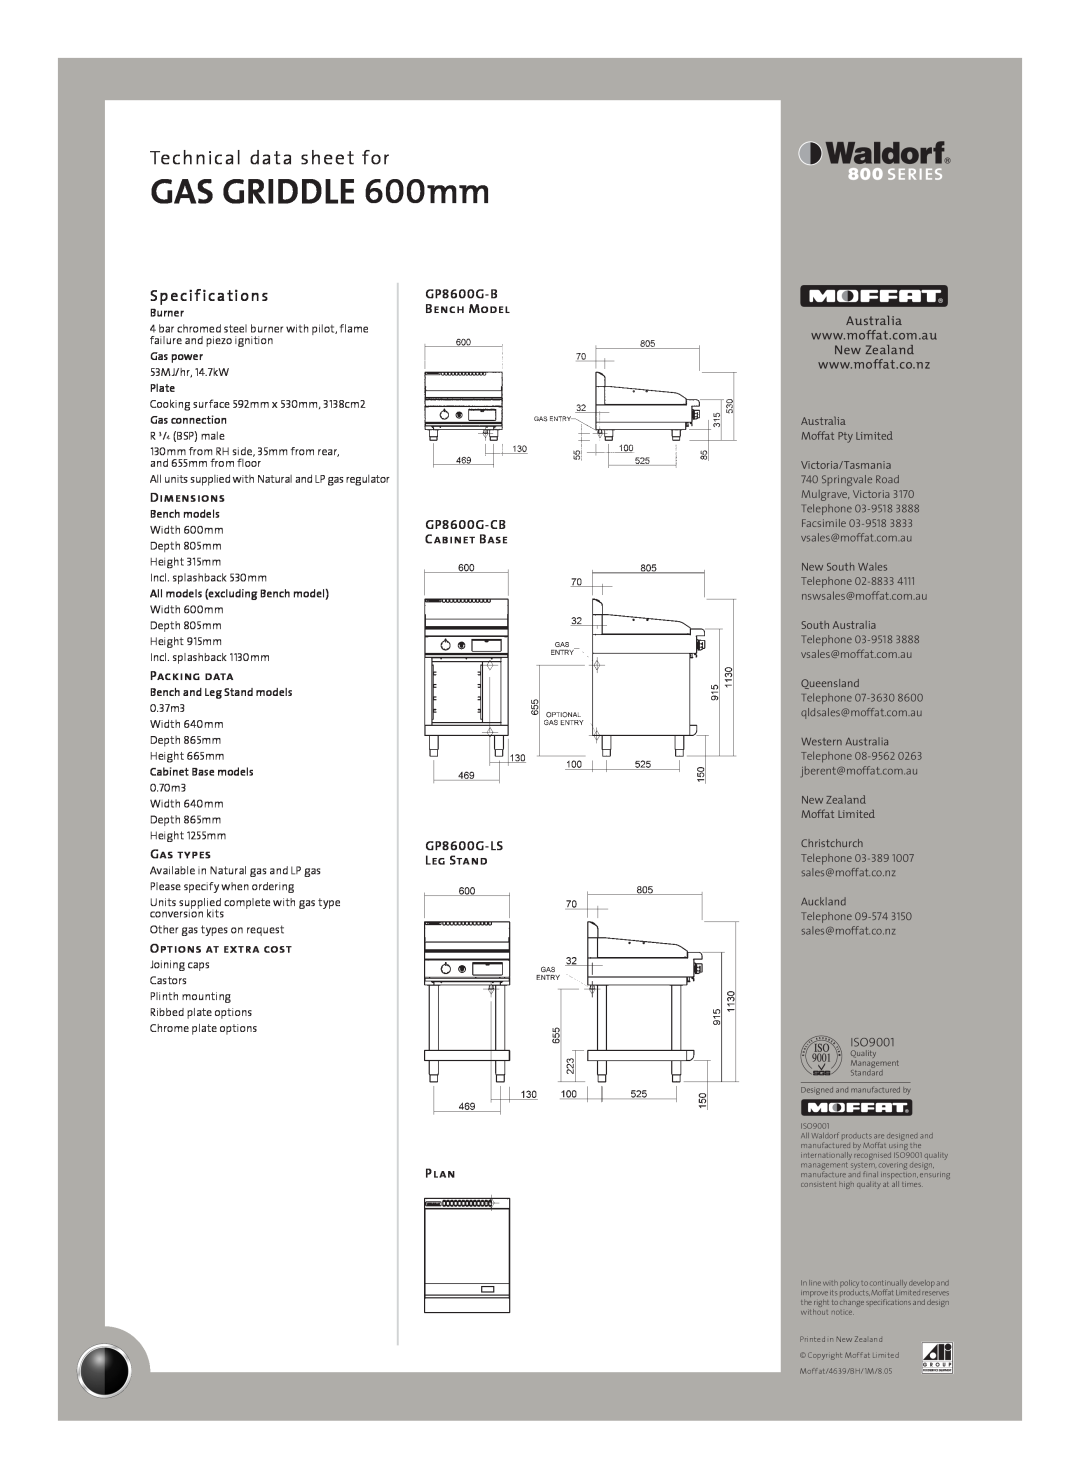 Moffat GP8600G-LS Sp e cif ications, GAS GRIDDLE 600mm, Technical data sheet for, Dimensions, Packing data, Gas types 